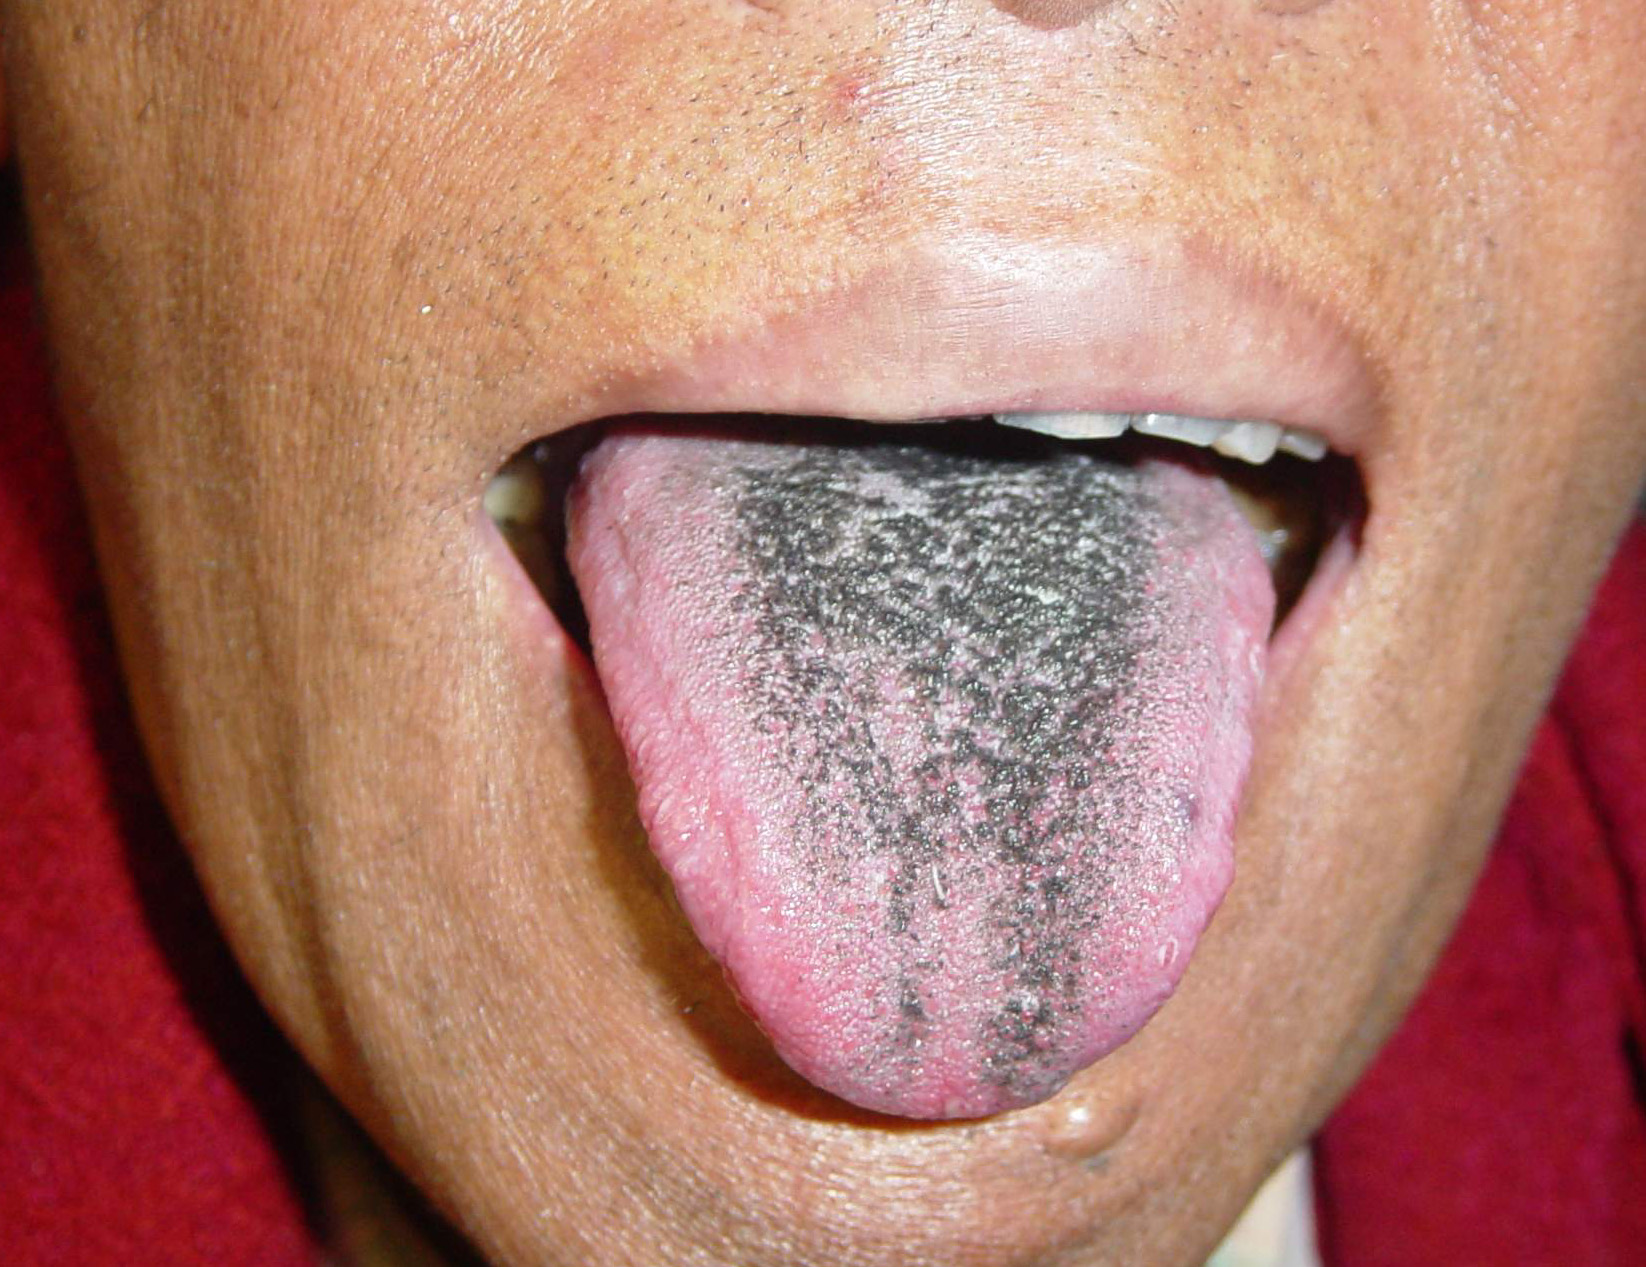 Black Hairy Tongue Pictures, Images & Photos | Photobucket